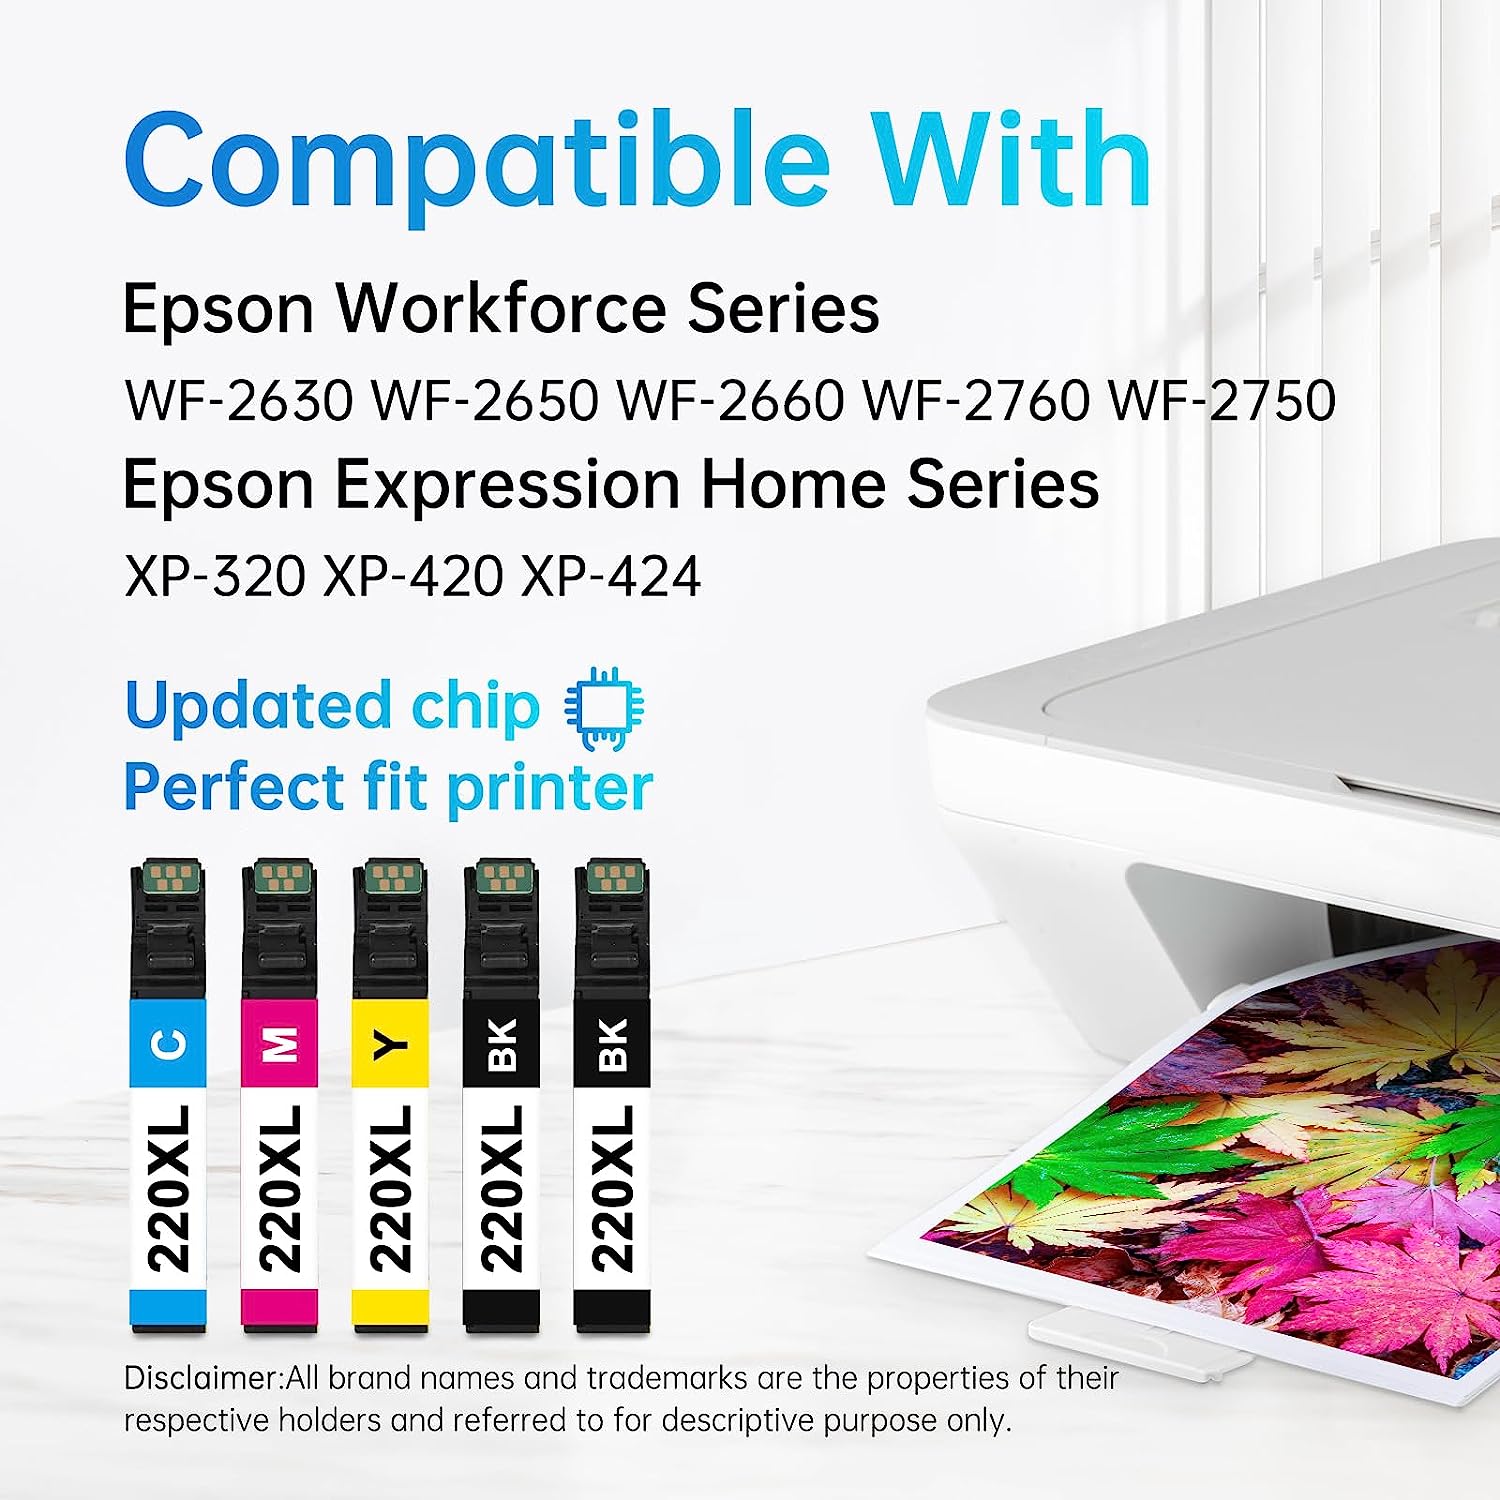 Printer Compatibility for 220XL Ink Cartridges: Detail of compatible printer models for LEMERO 220XL high-yield ink cartridges, suitable for various Epson Workforce and Expression Home series printers. Updated chip ensures perfect printer fit.